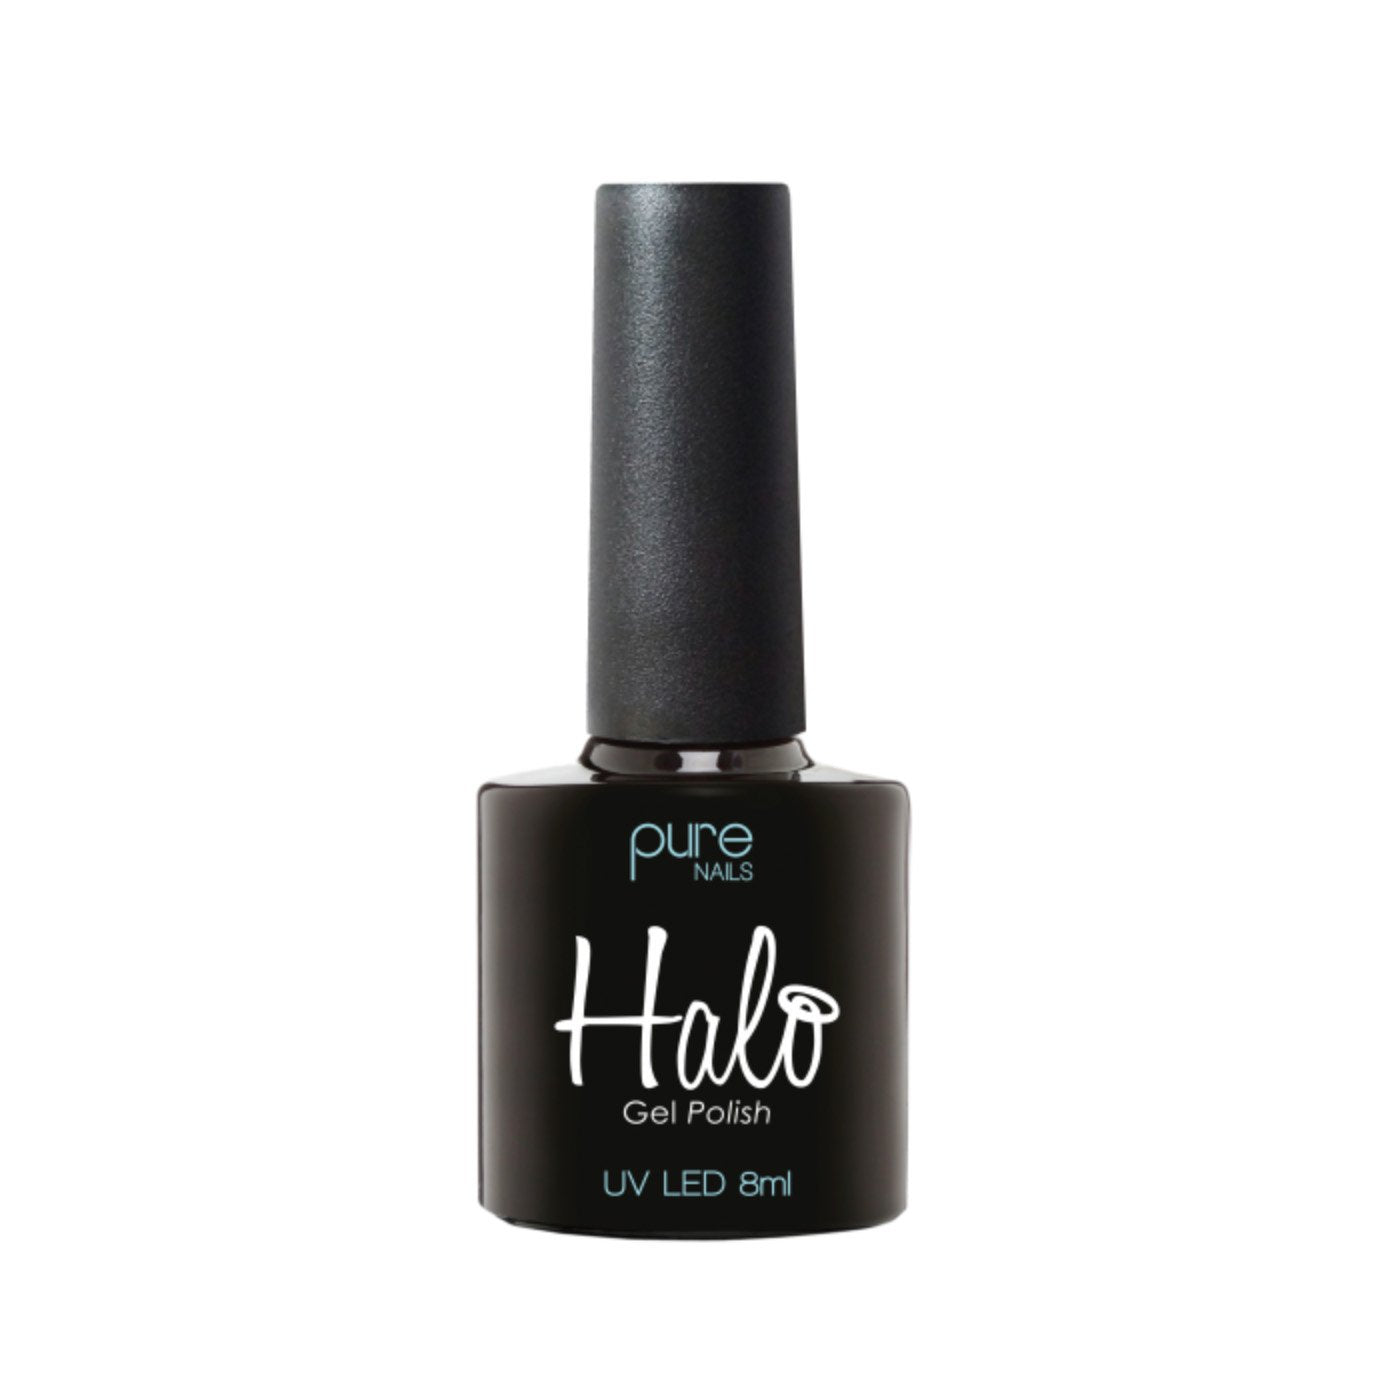 Halo Gel Polish - Top Coat (15ml - LARGE) - Ultimate Hair and Beauty